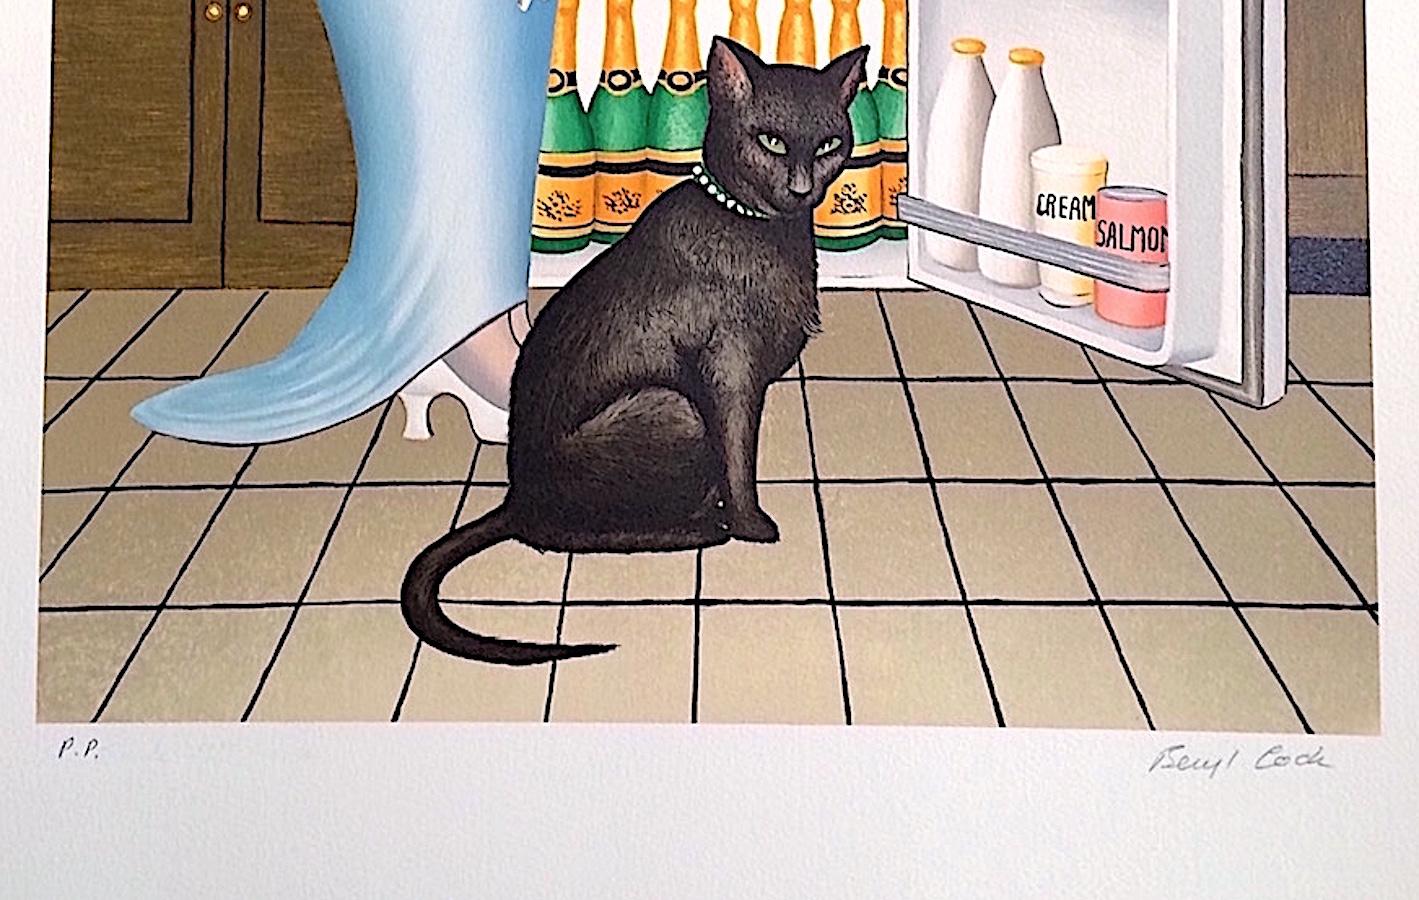 PERCY AT THE FRIDGE Signed Lithograph, Black Cat, Champagne, British Humor - Contemporary Print by Beryl Cook